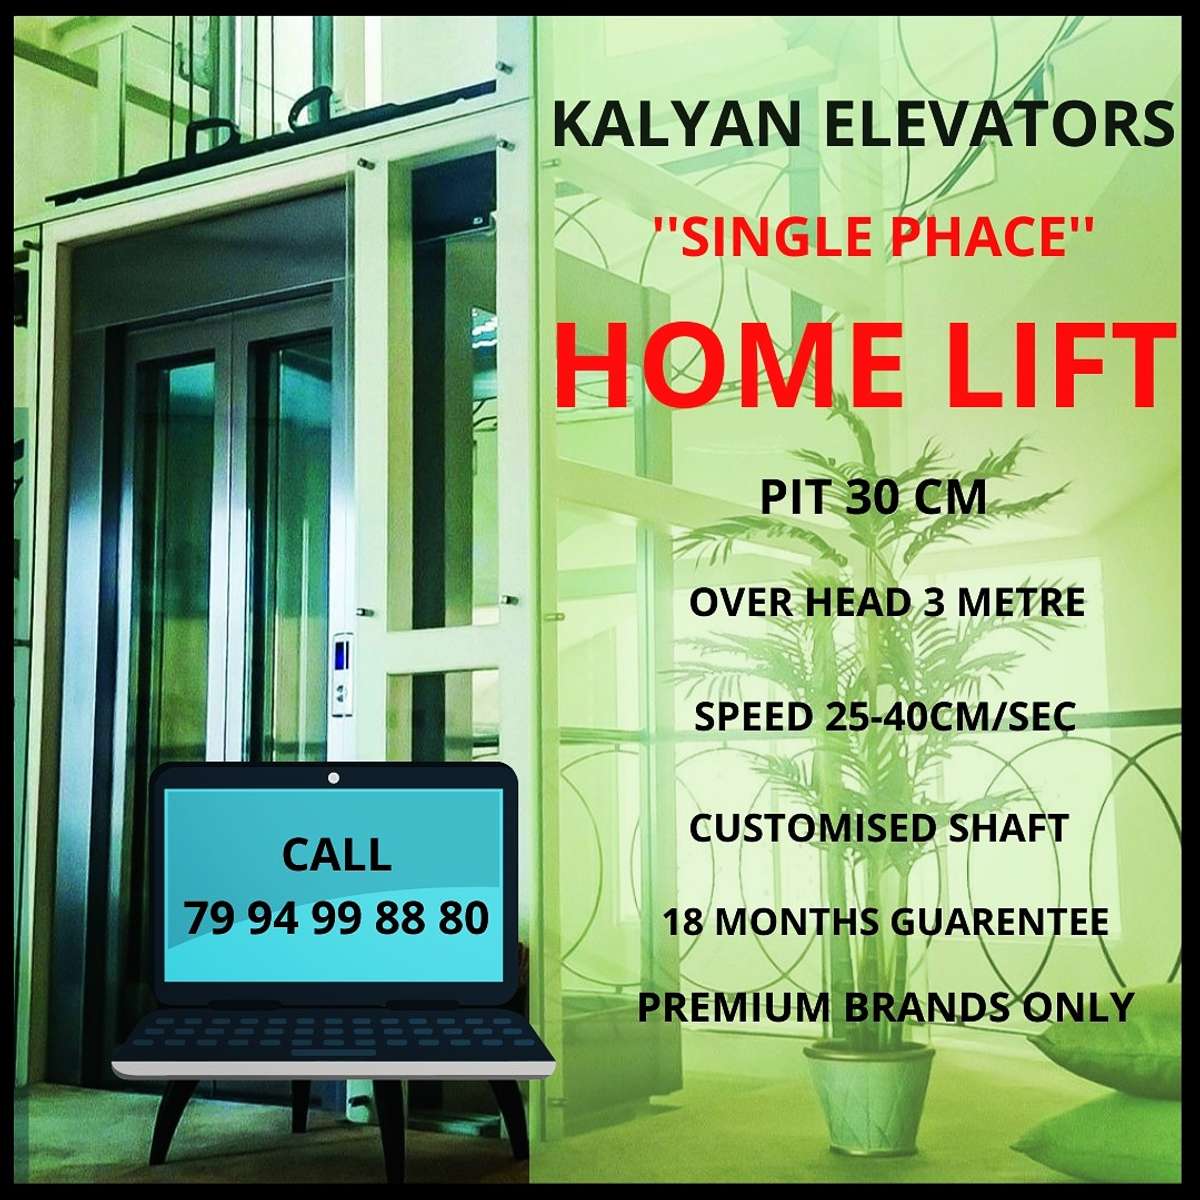 Kalyan Home Elevators offers the long-awaited solution to vertical mobility within homes at affordable prices and easy-to-use features. Our customized and aesthetically designed home lifts are easily installable in preexisting homes as well as houses under construction, and help you relieve the headache of climbing. More details:

we do all kind of :-
Home Lifts
Hospital Lifts
Capsule Lifts
Commercial Lifts
Customised Passenger Lifts
Car Lifts
Parking Lifts